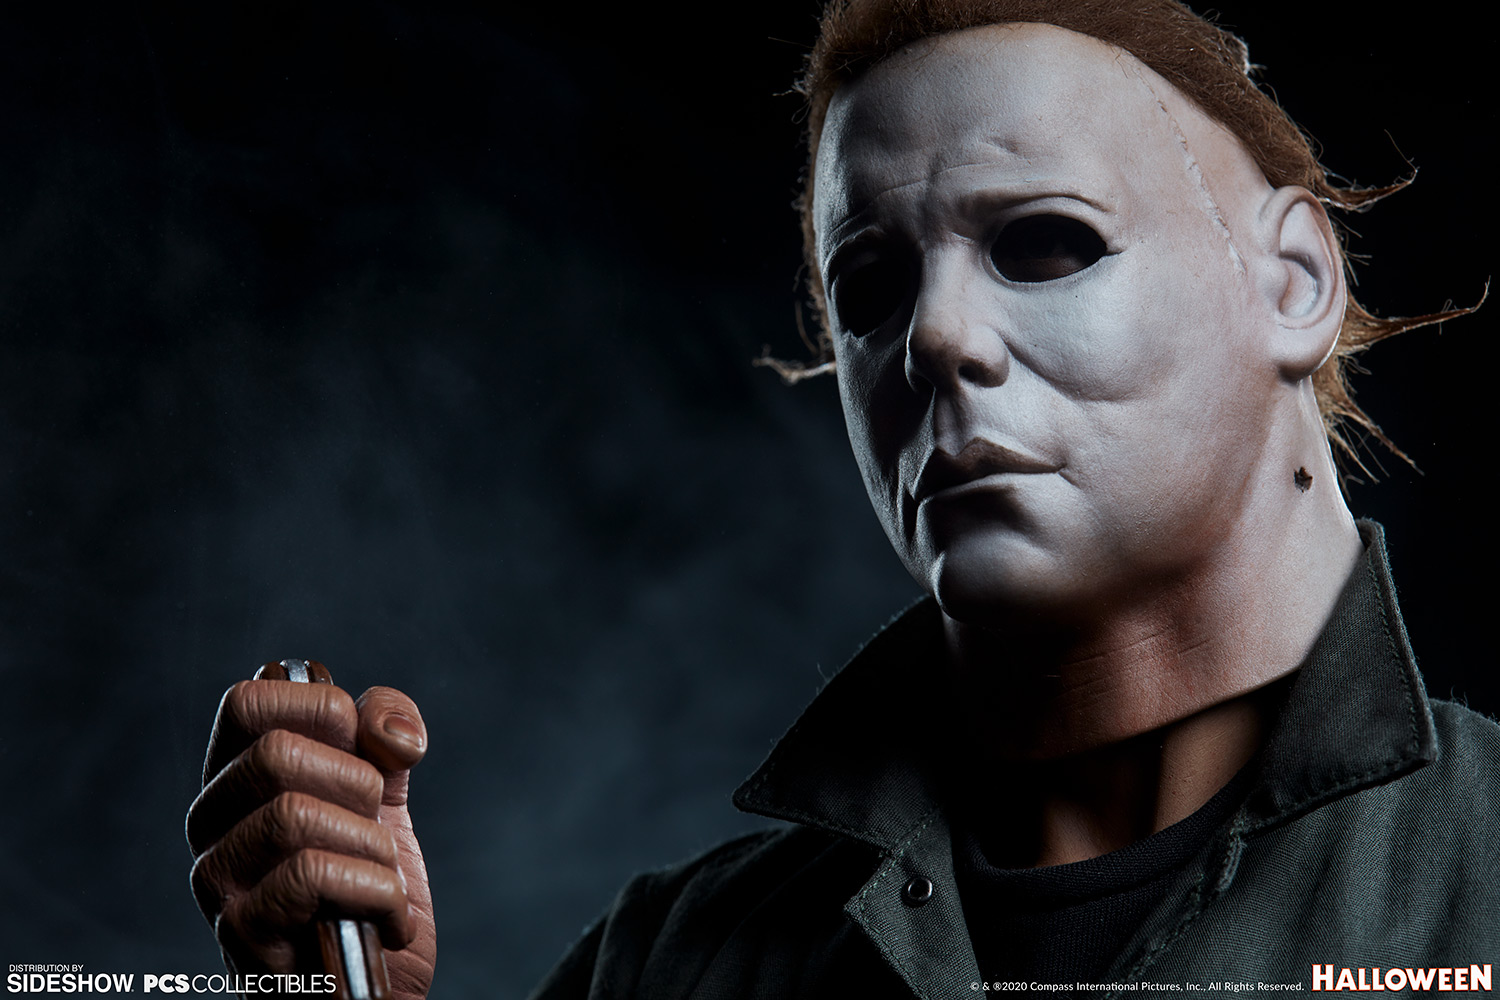 Michael-Myers-14-Scale-Statue-PCS-Collectibles-1.jpg